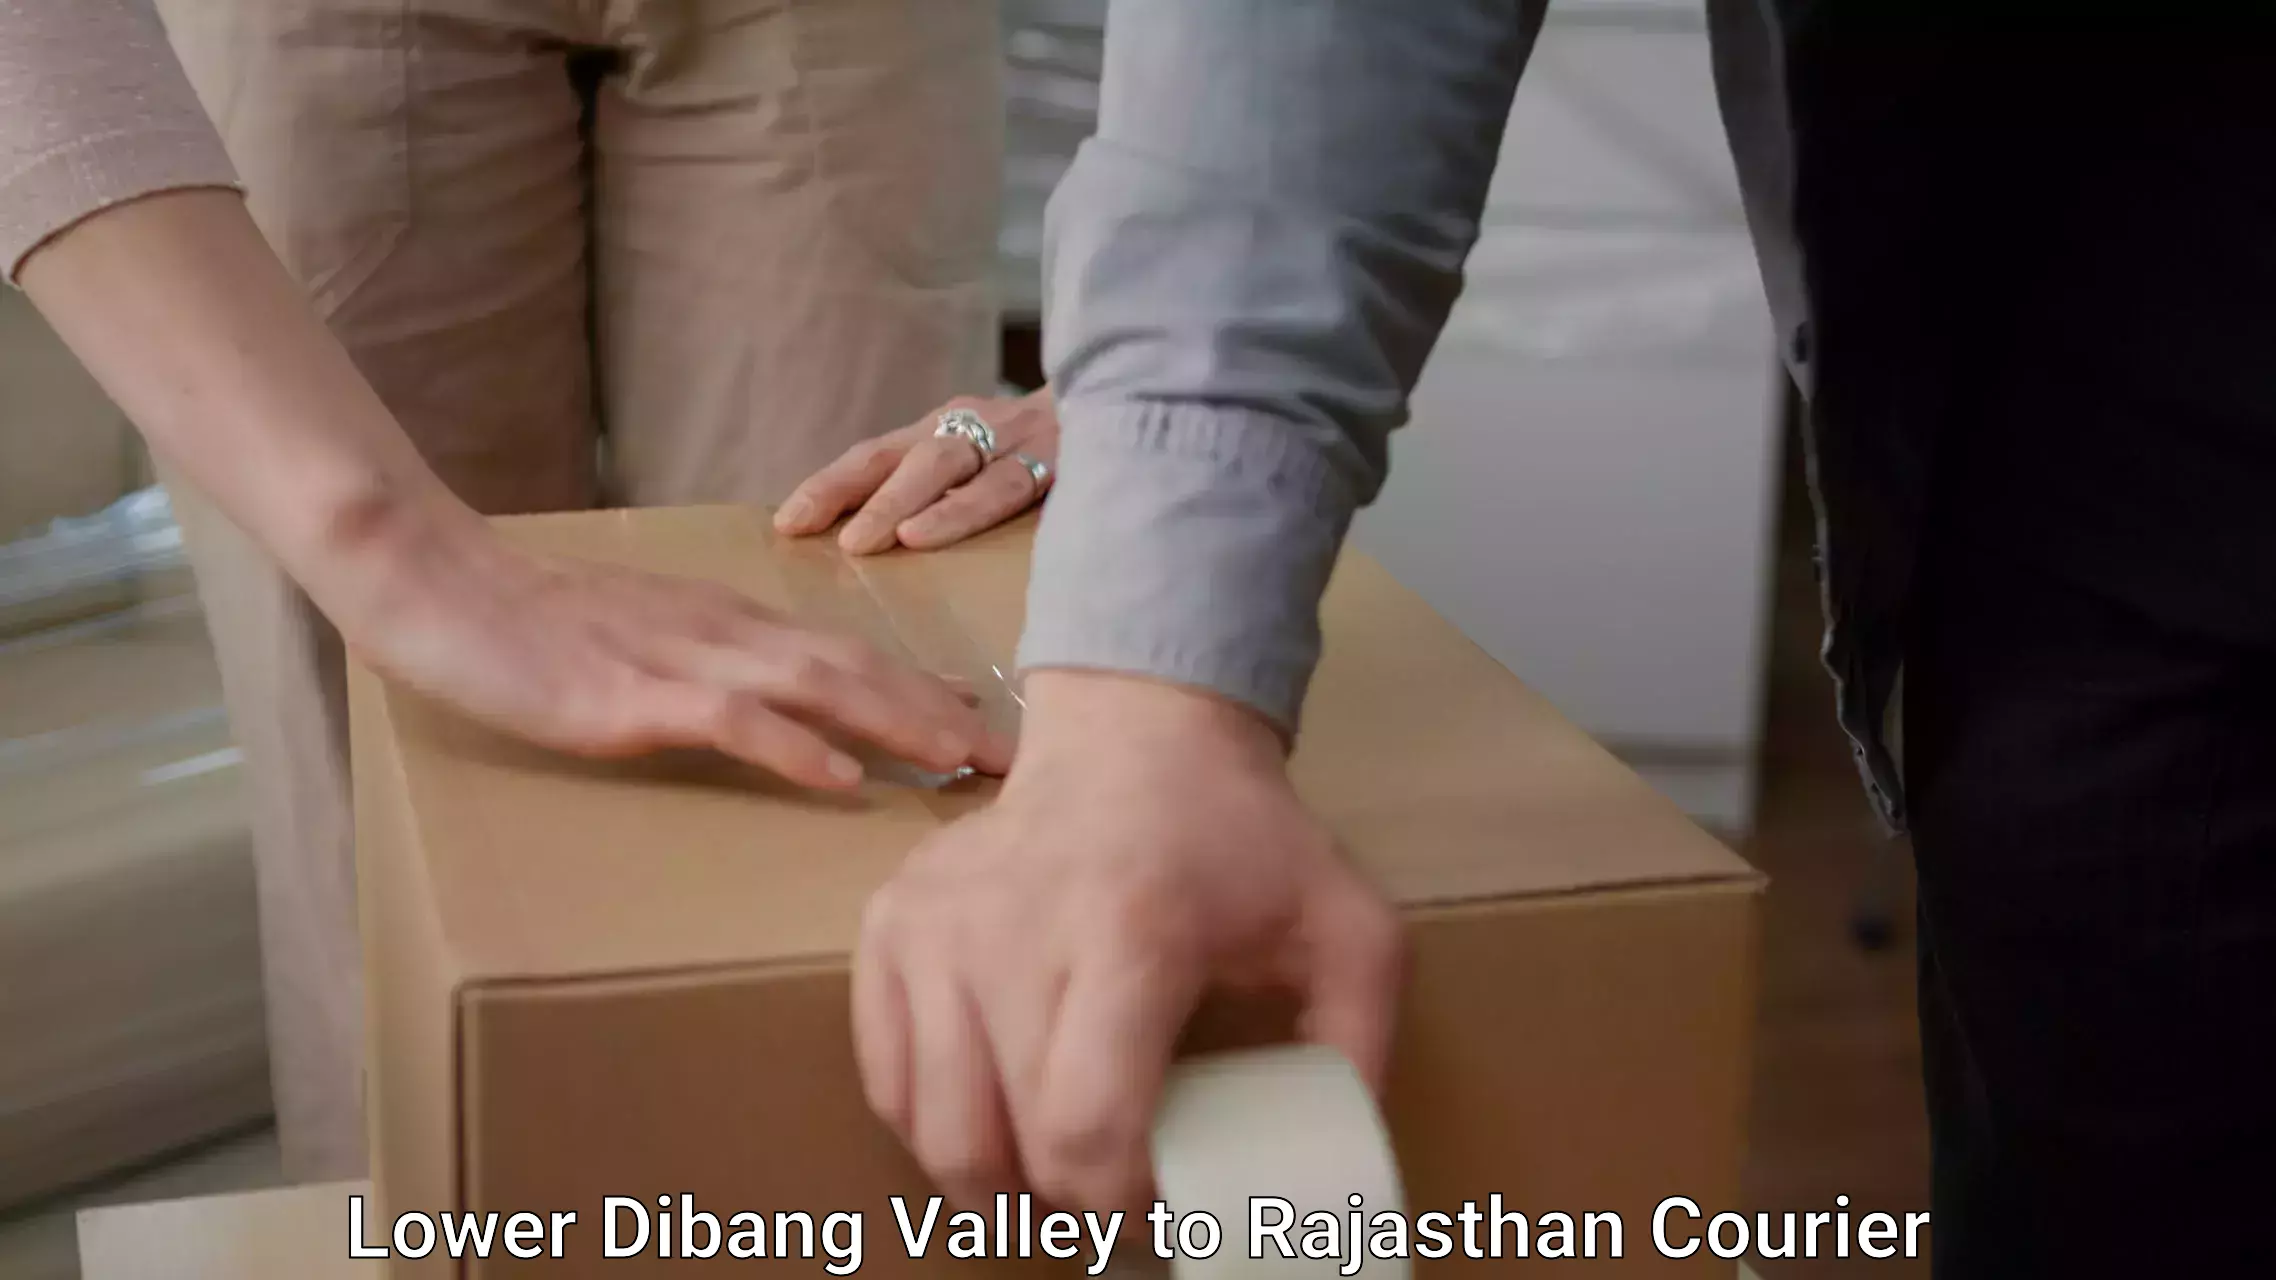 Furniture delivery service Lower Dibang Valley to Dausa